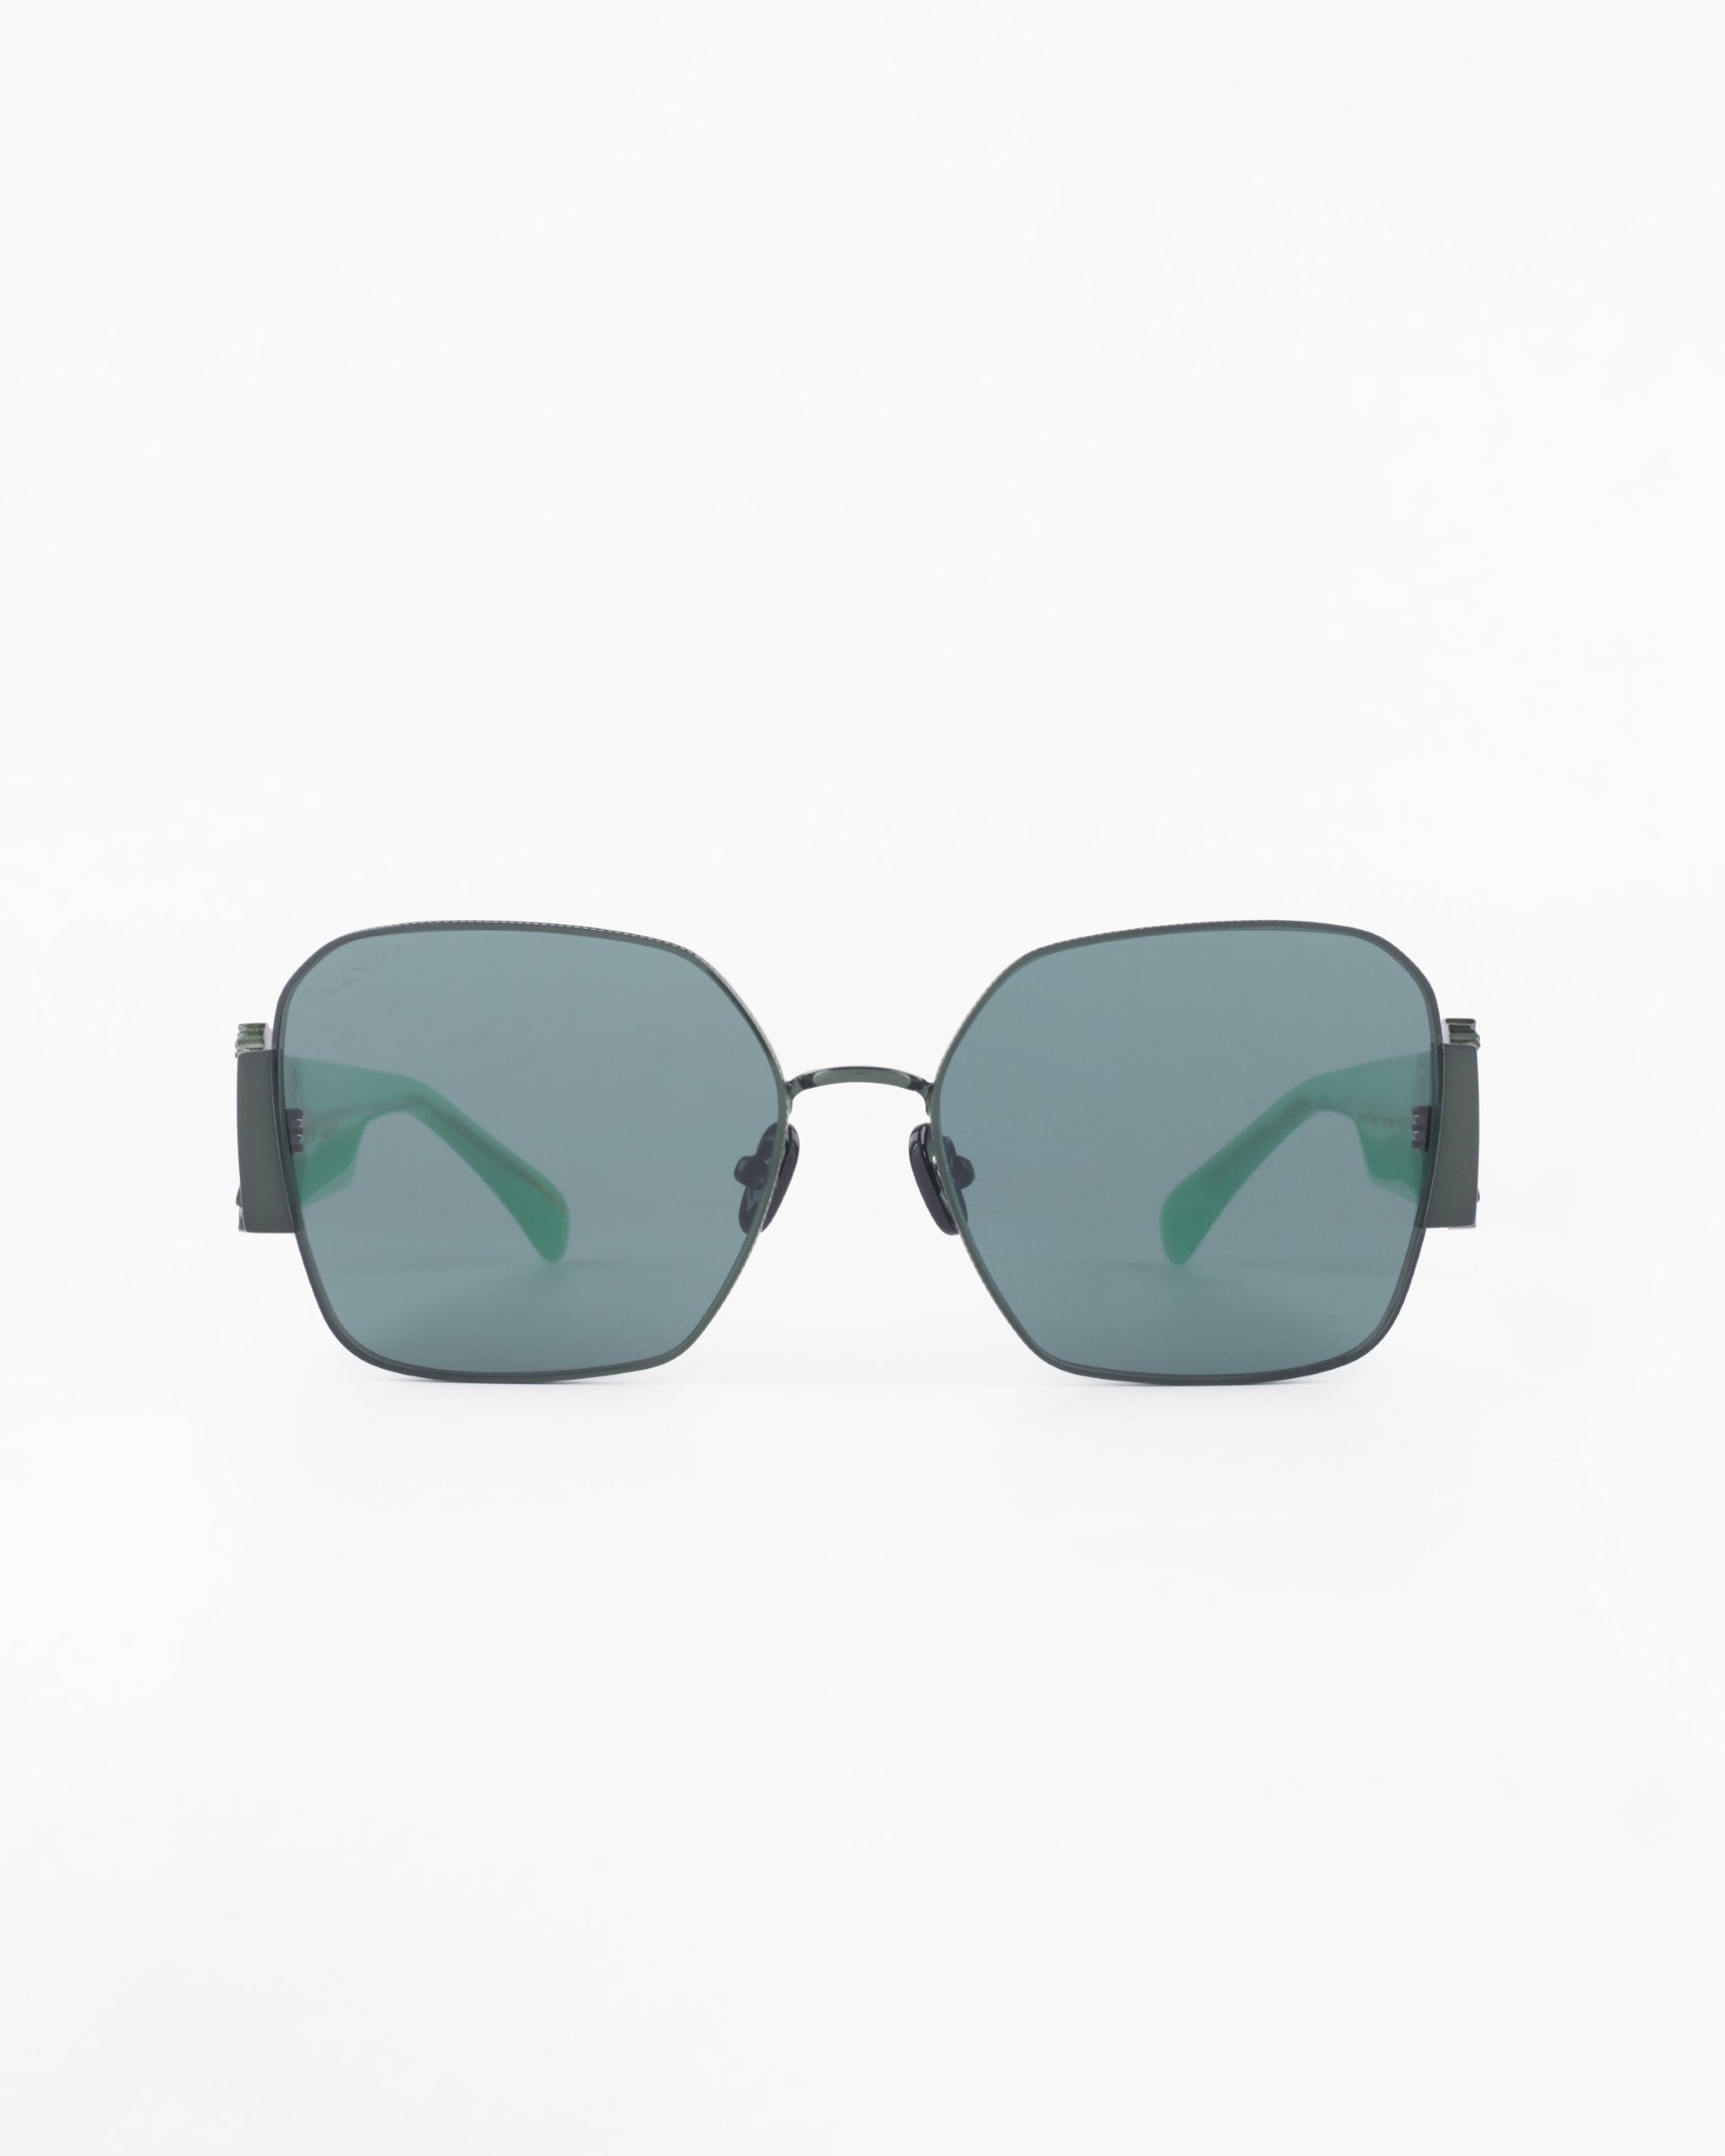 A pair of stylish, modern Frida Mask sunglasses from For Art&#39;s Sake® with black metal frames and dark green-tinted square lenses. The design features thin temples that curve inward slightly towards the ends, contrasting against the clear background. The ultra-lightweight nylon lenses offer 100% UVA &amp; UVB protection.